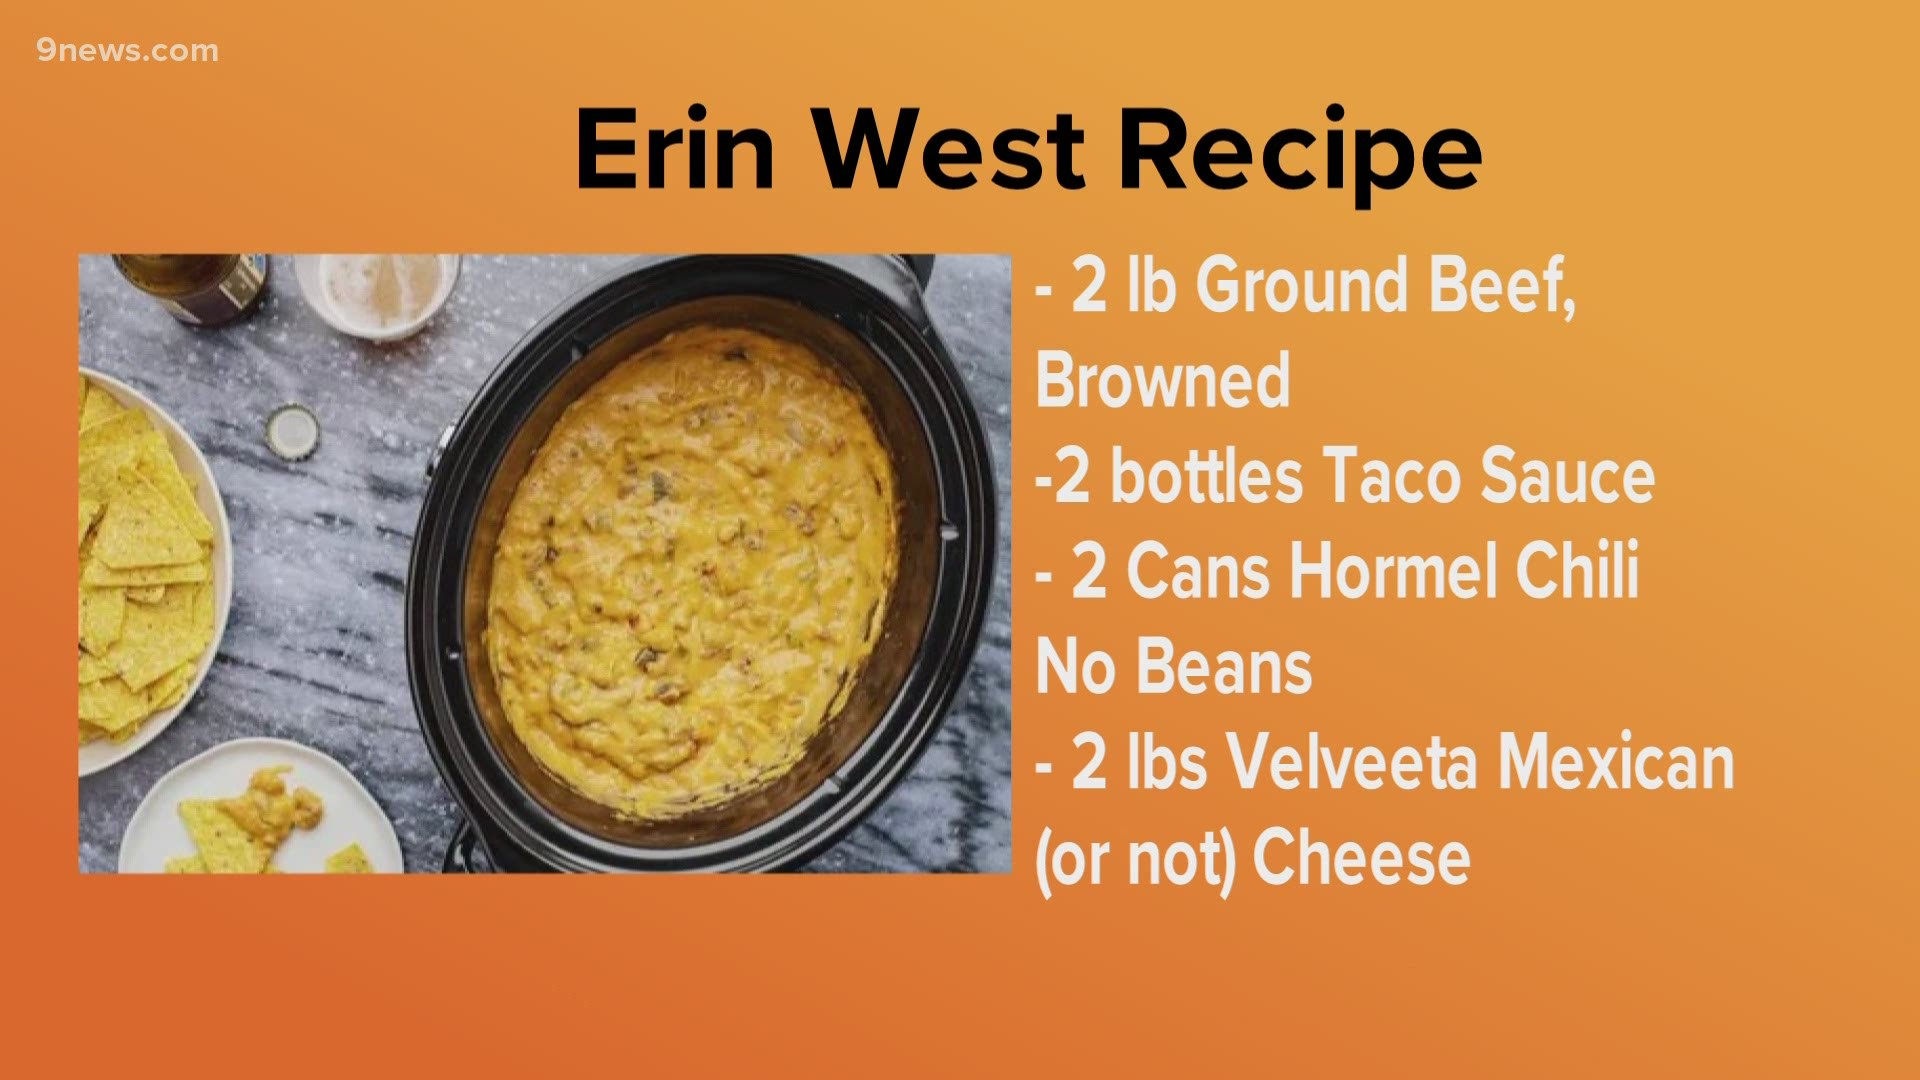 Every weekend, we ask you to share your recipes and share one on air. This time we asked for dips, and here's a great one from Erin West.